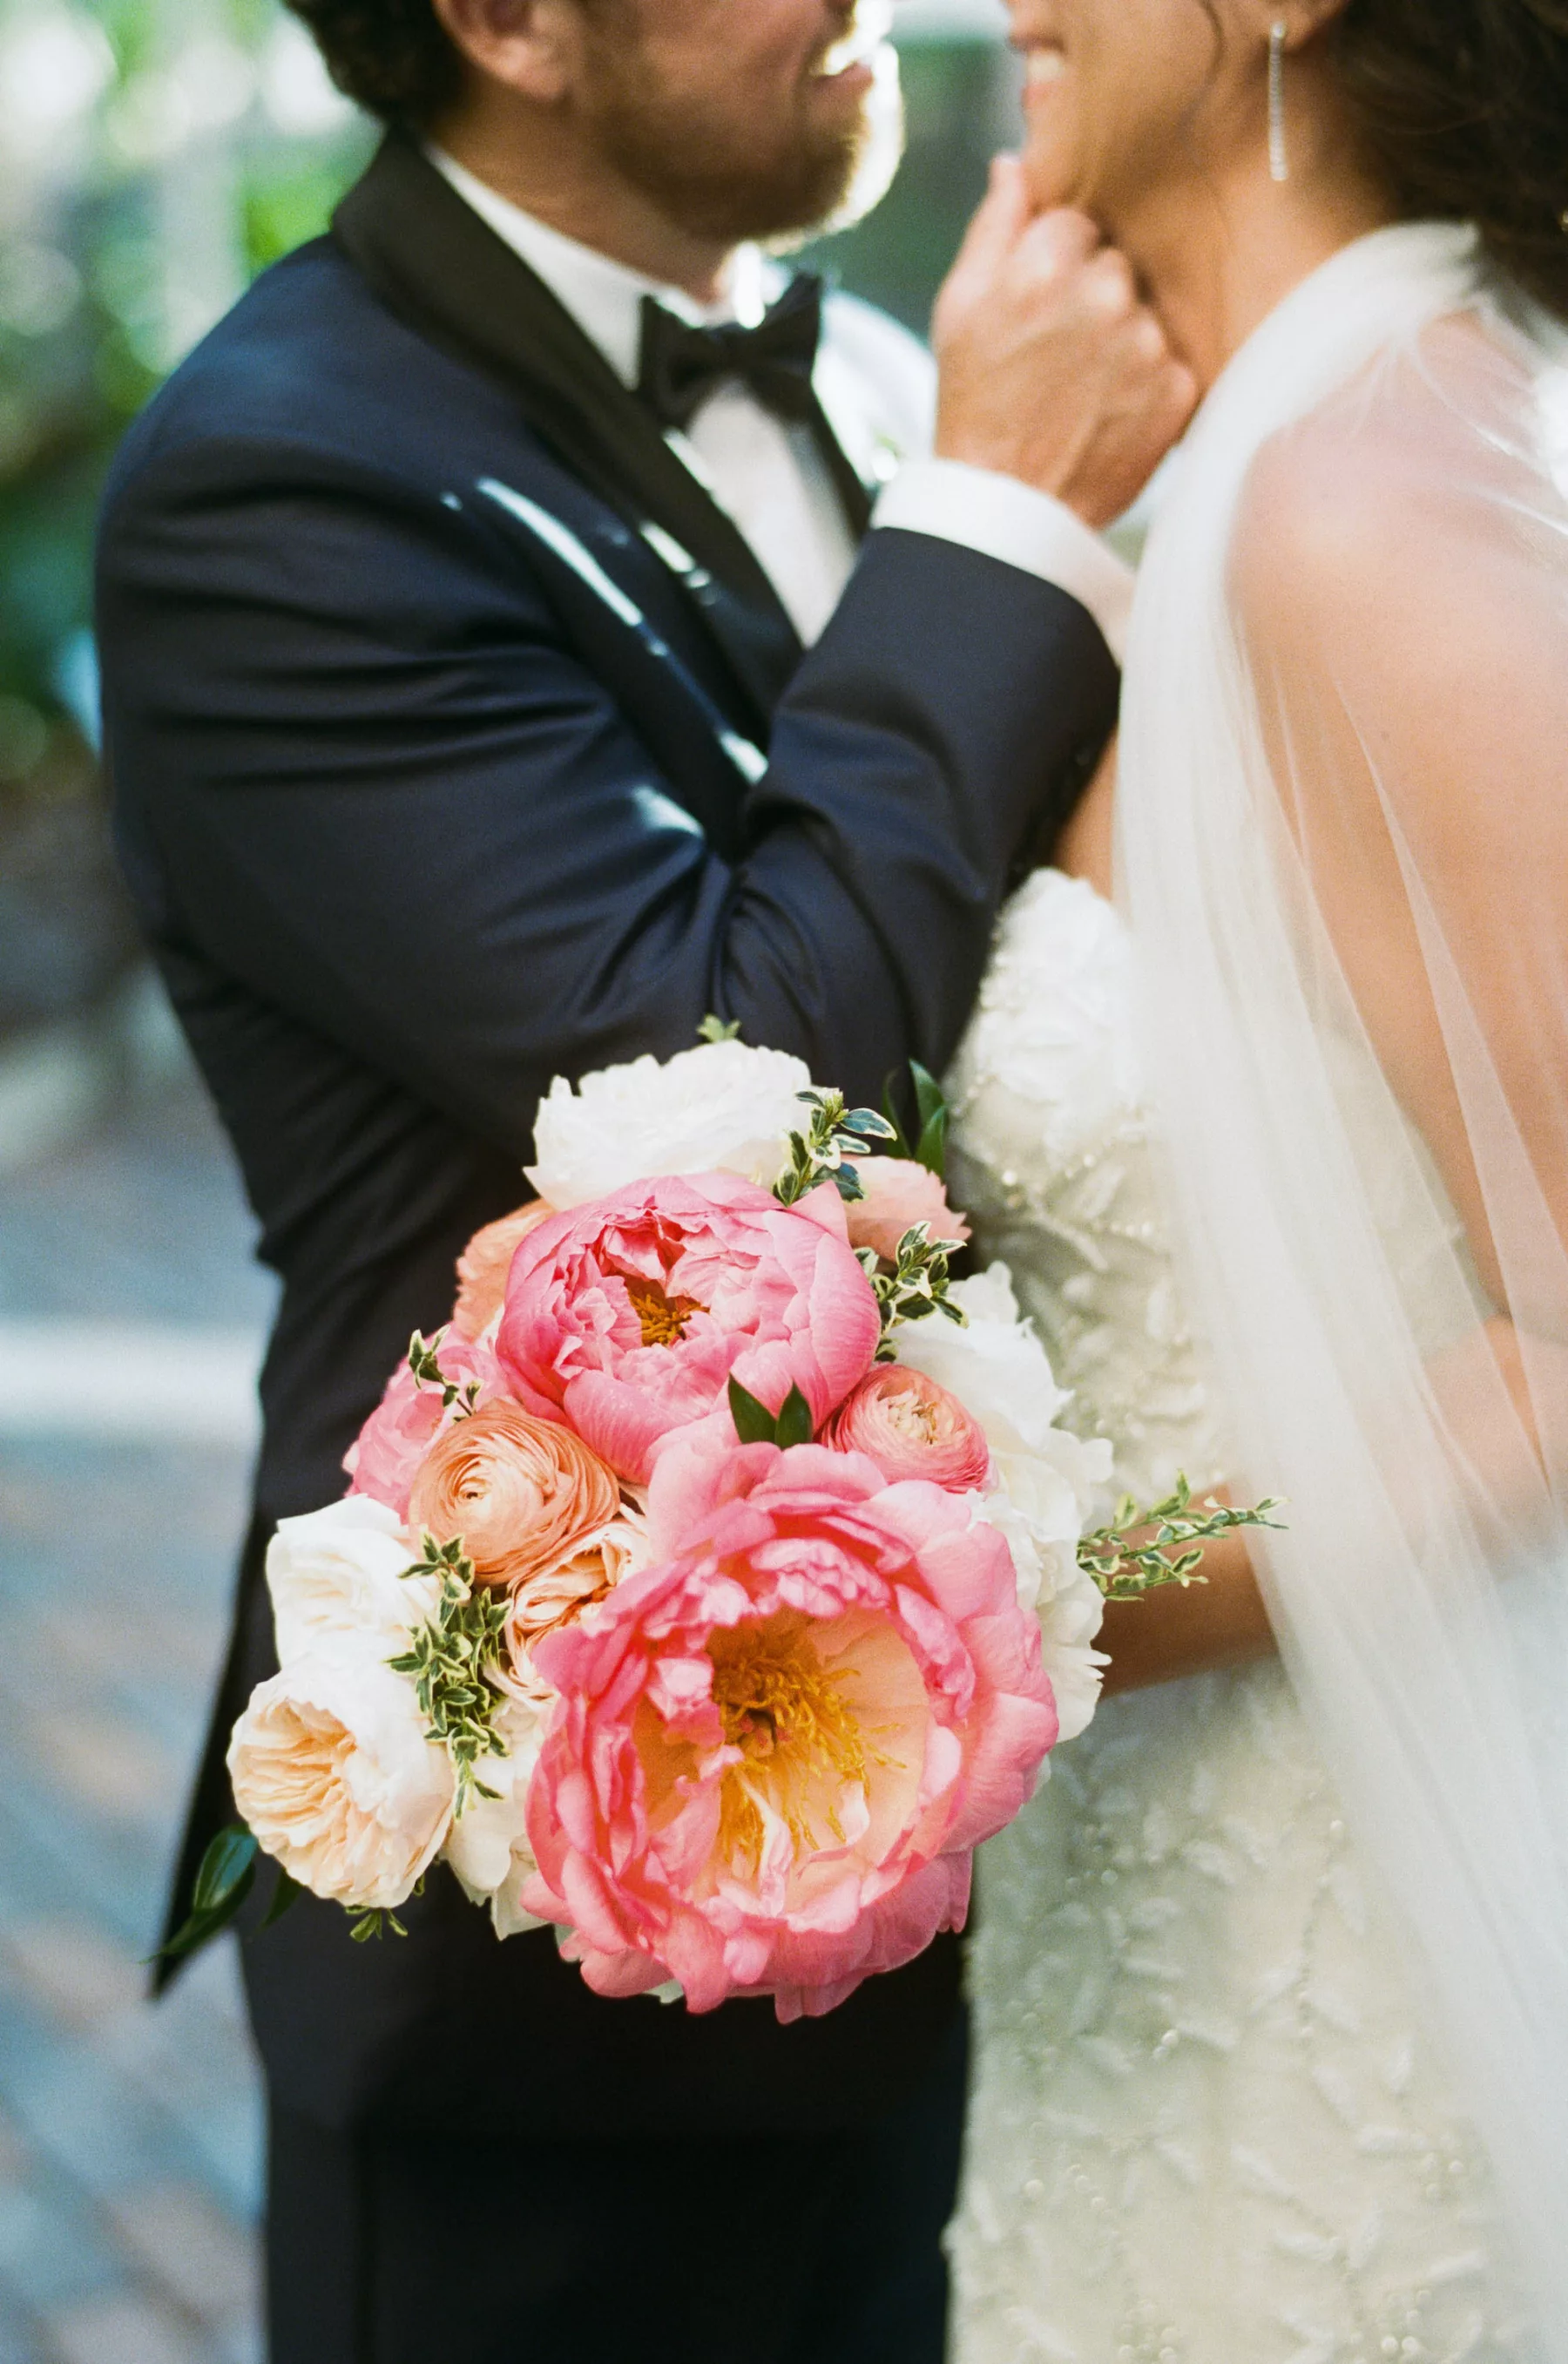 Elegant Spring Bridal Bouquet with Pink and White Roses Inspiration | St Pete Florist Bruce Wayne Florals